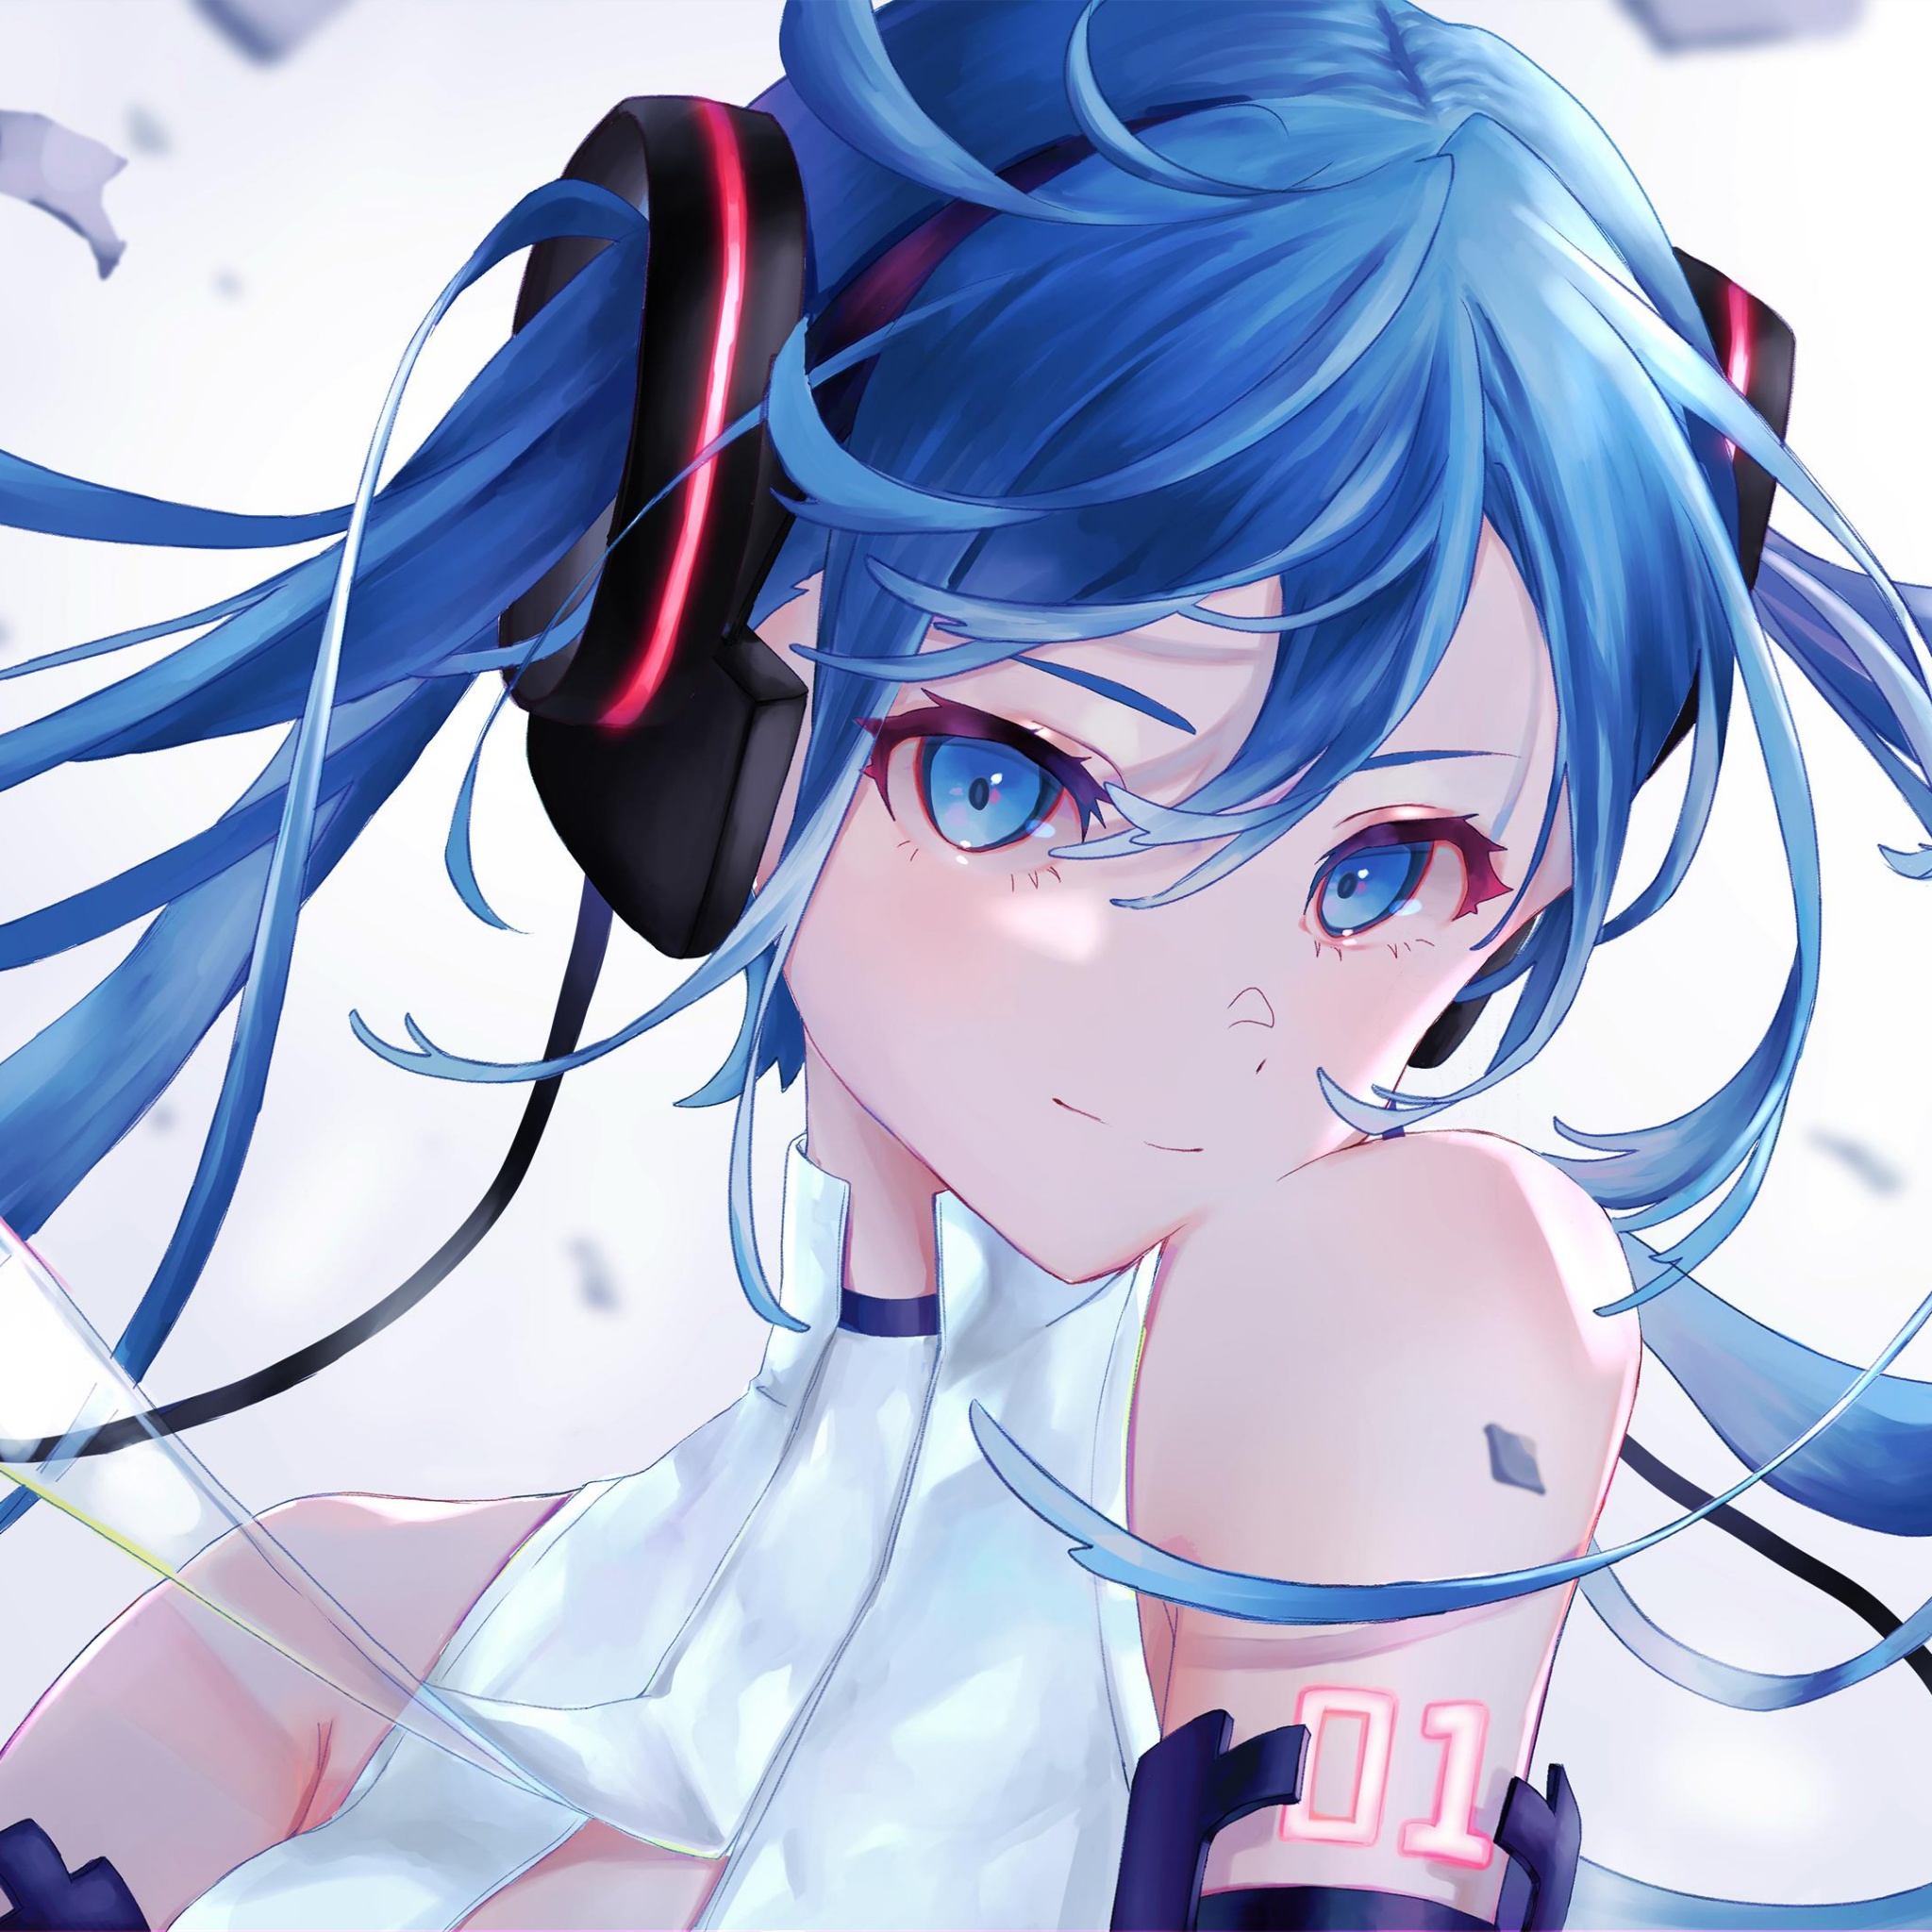 Top 30 Blue Hair Anime Girls That'll Steal Your Heart